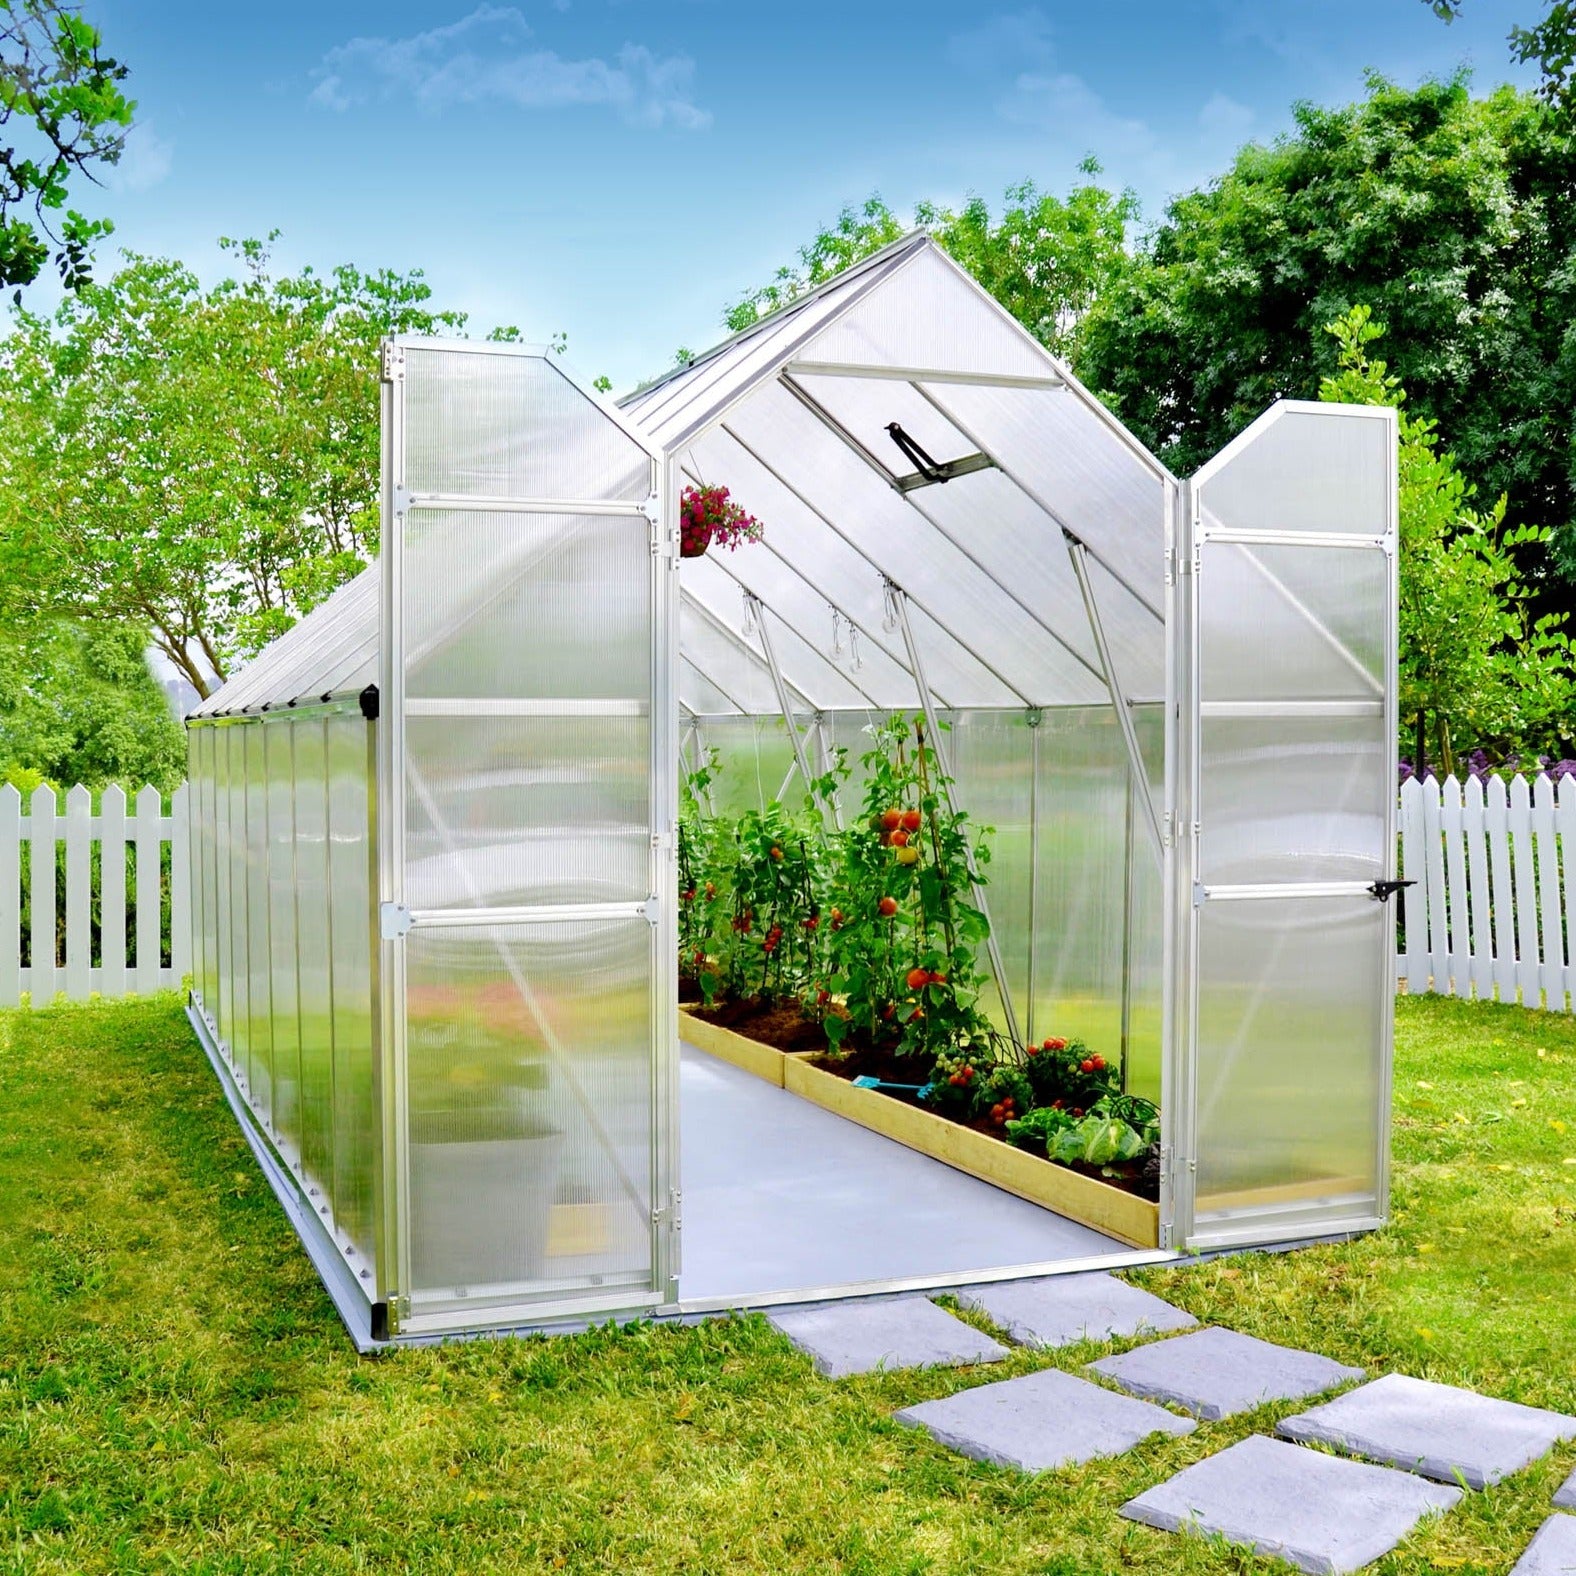 Canopia by Palram 8 x 16 Essence Silver Greenhouse